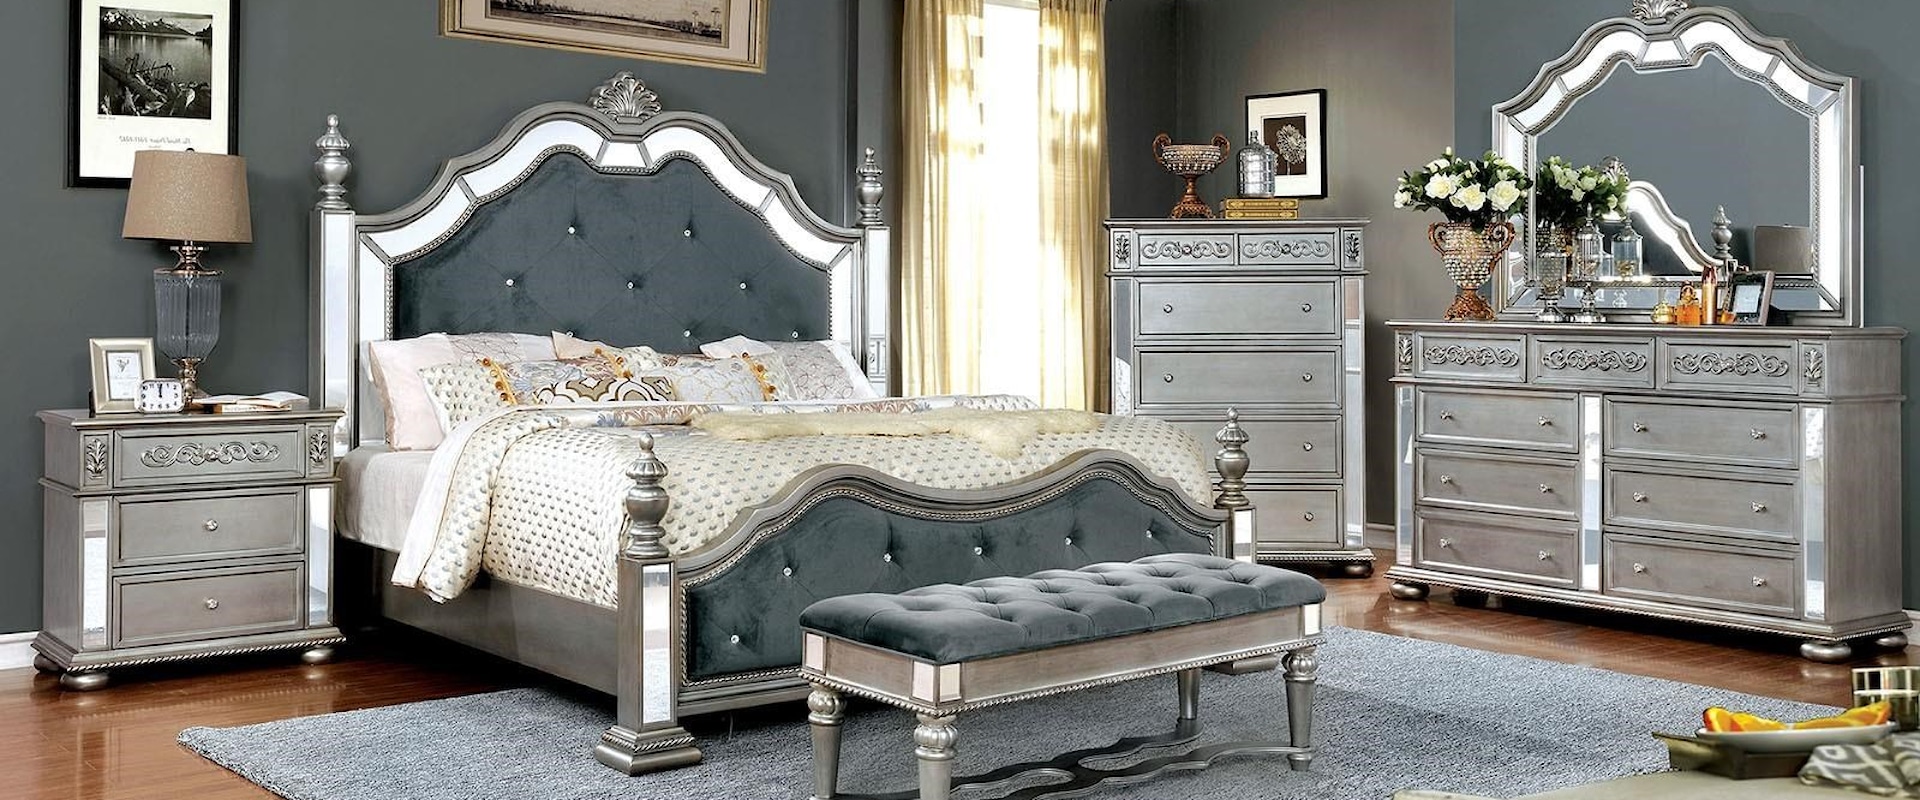 Lavish Traditional Style Queen Bedroom Group